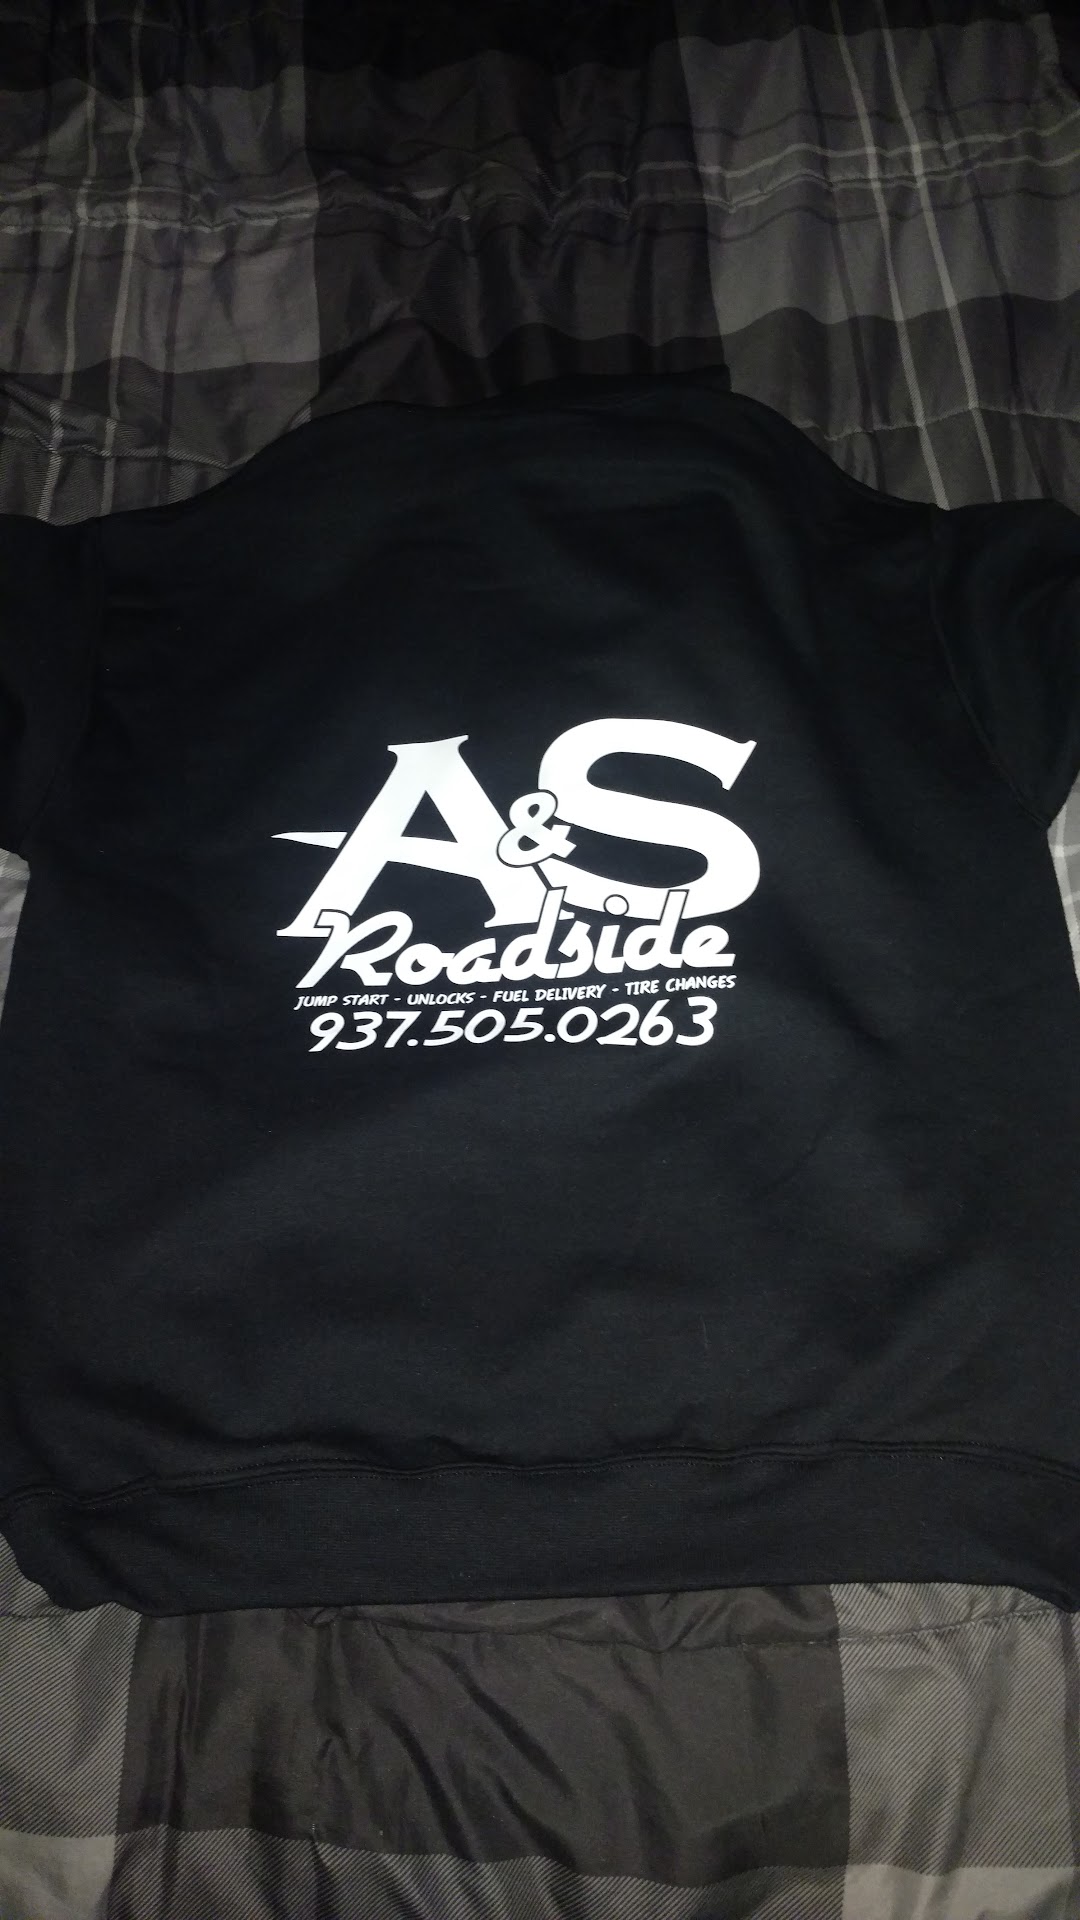 A&S Roadside Services